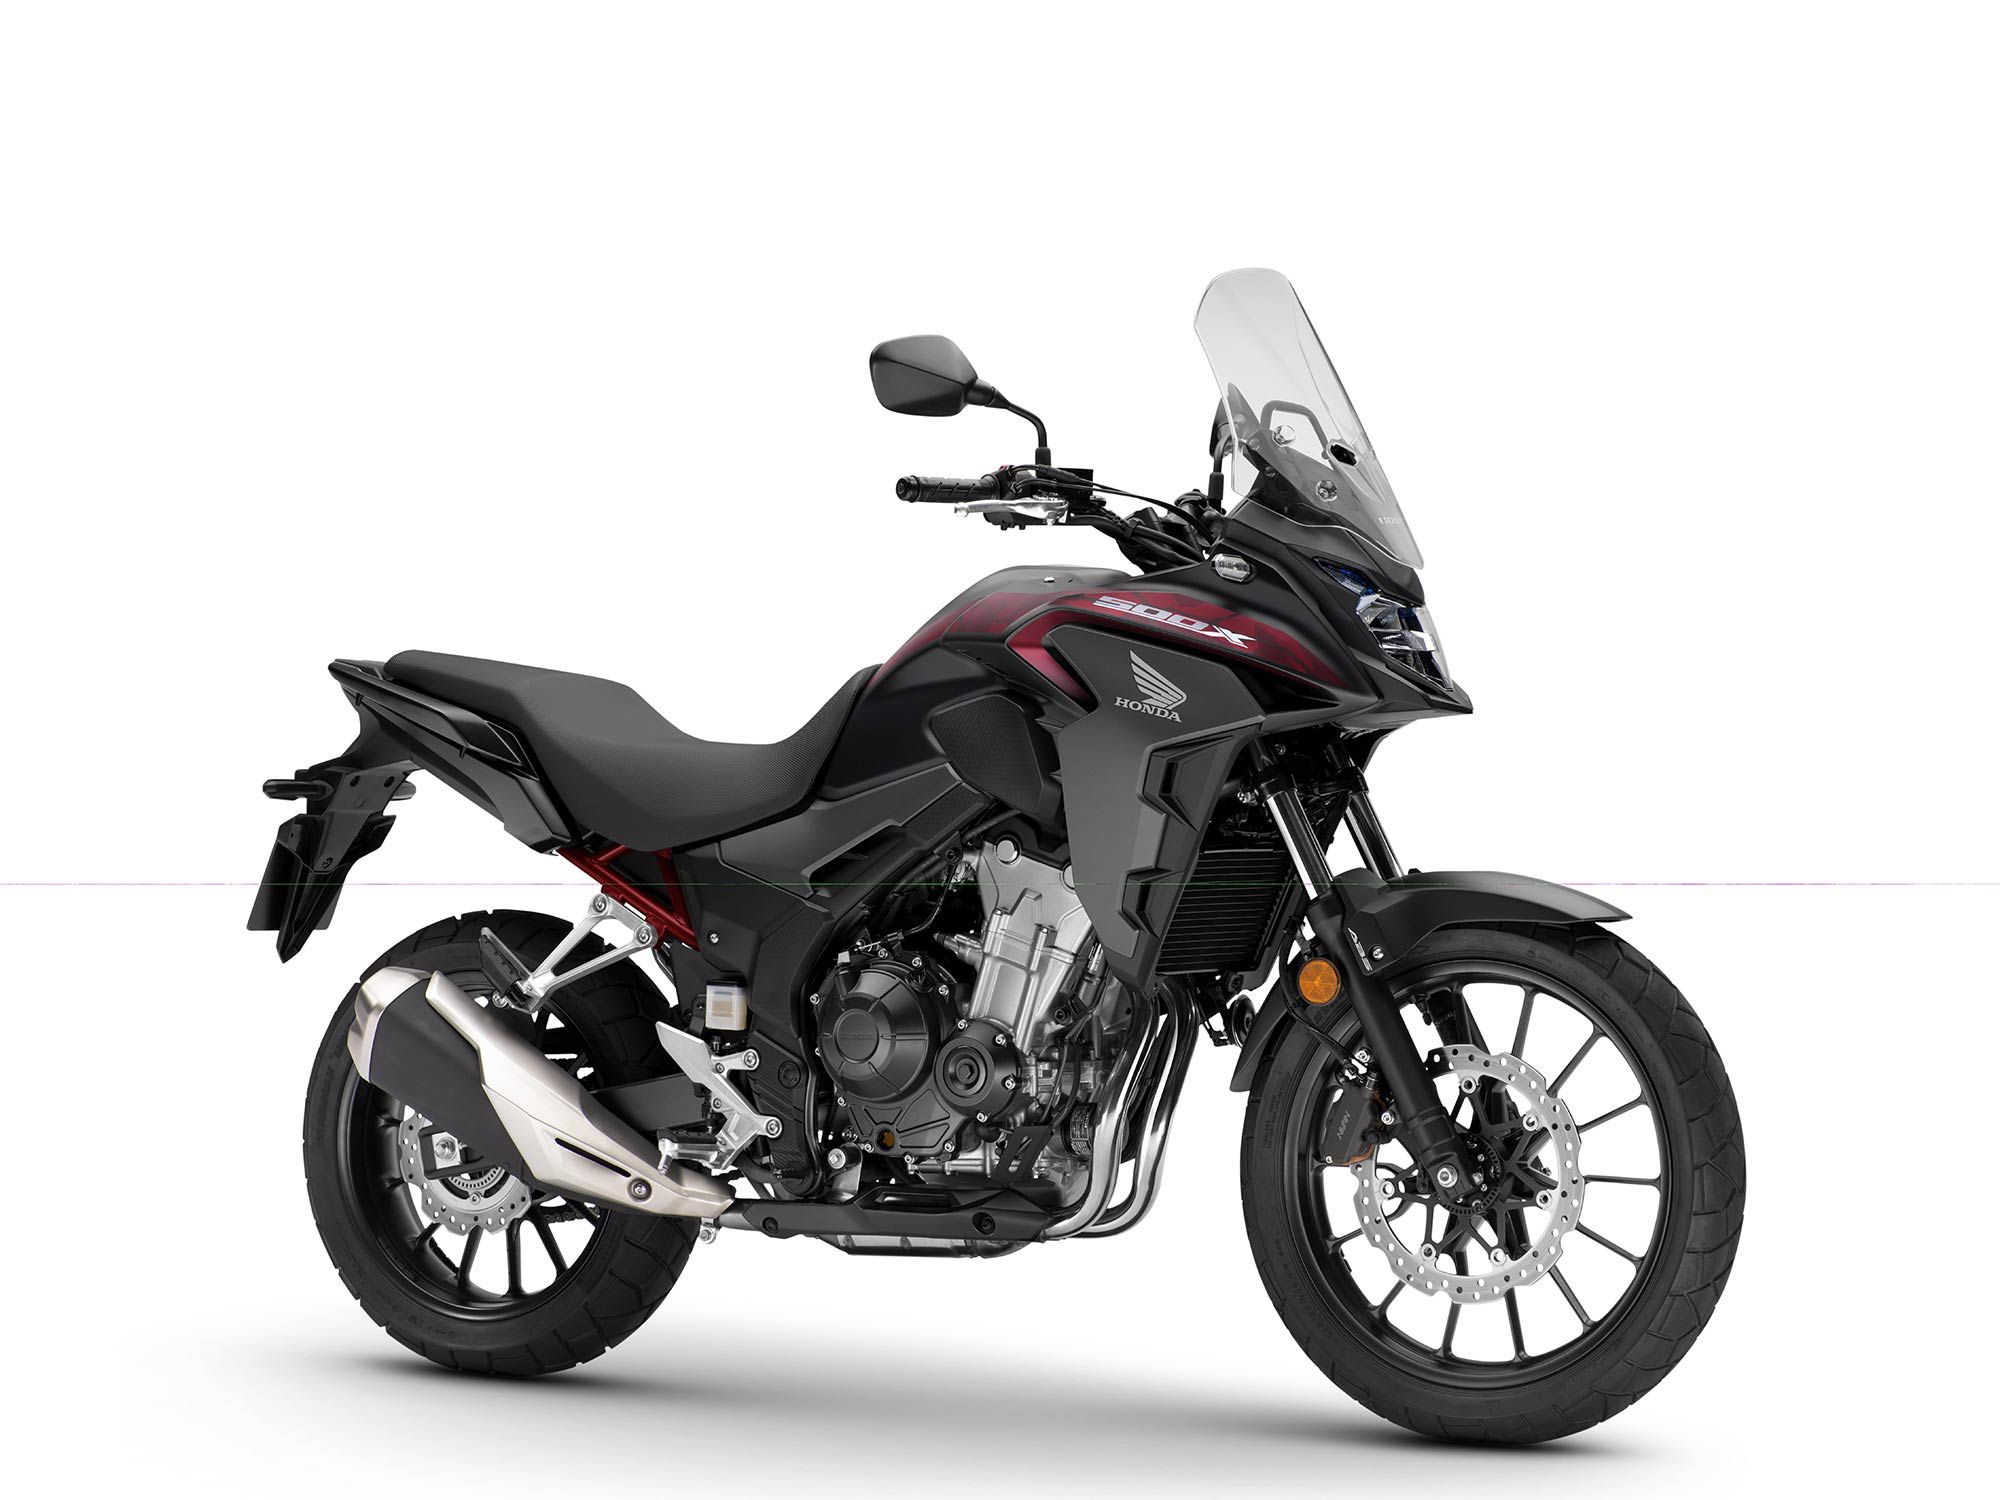 The Honda CB500X is comfortable and capable and just enough fun to want to ride all the time.